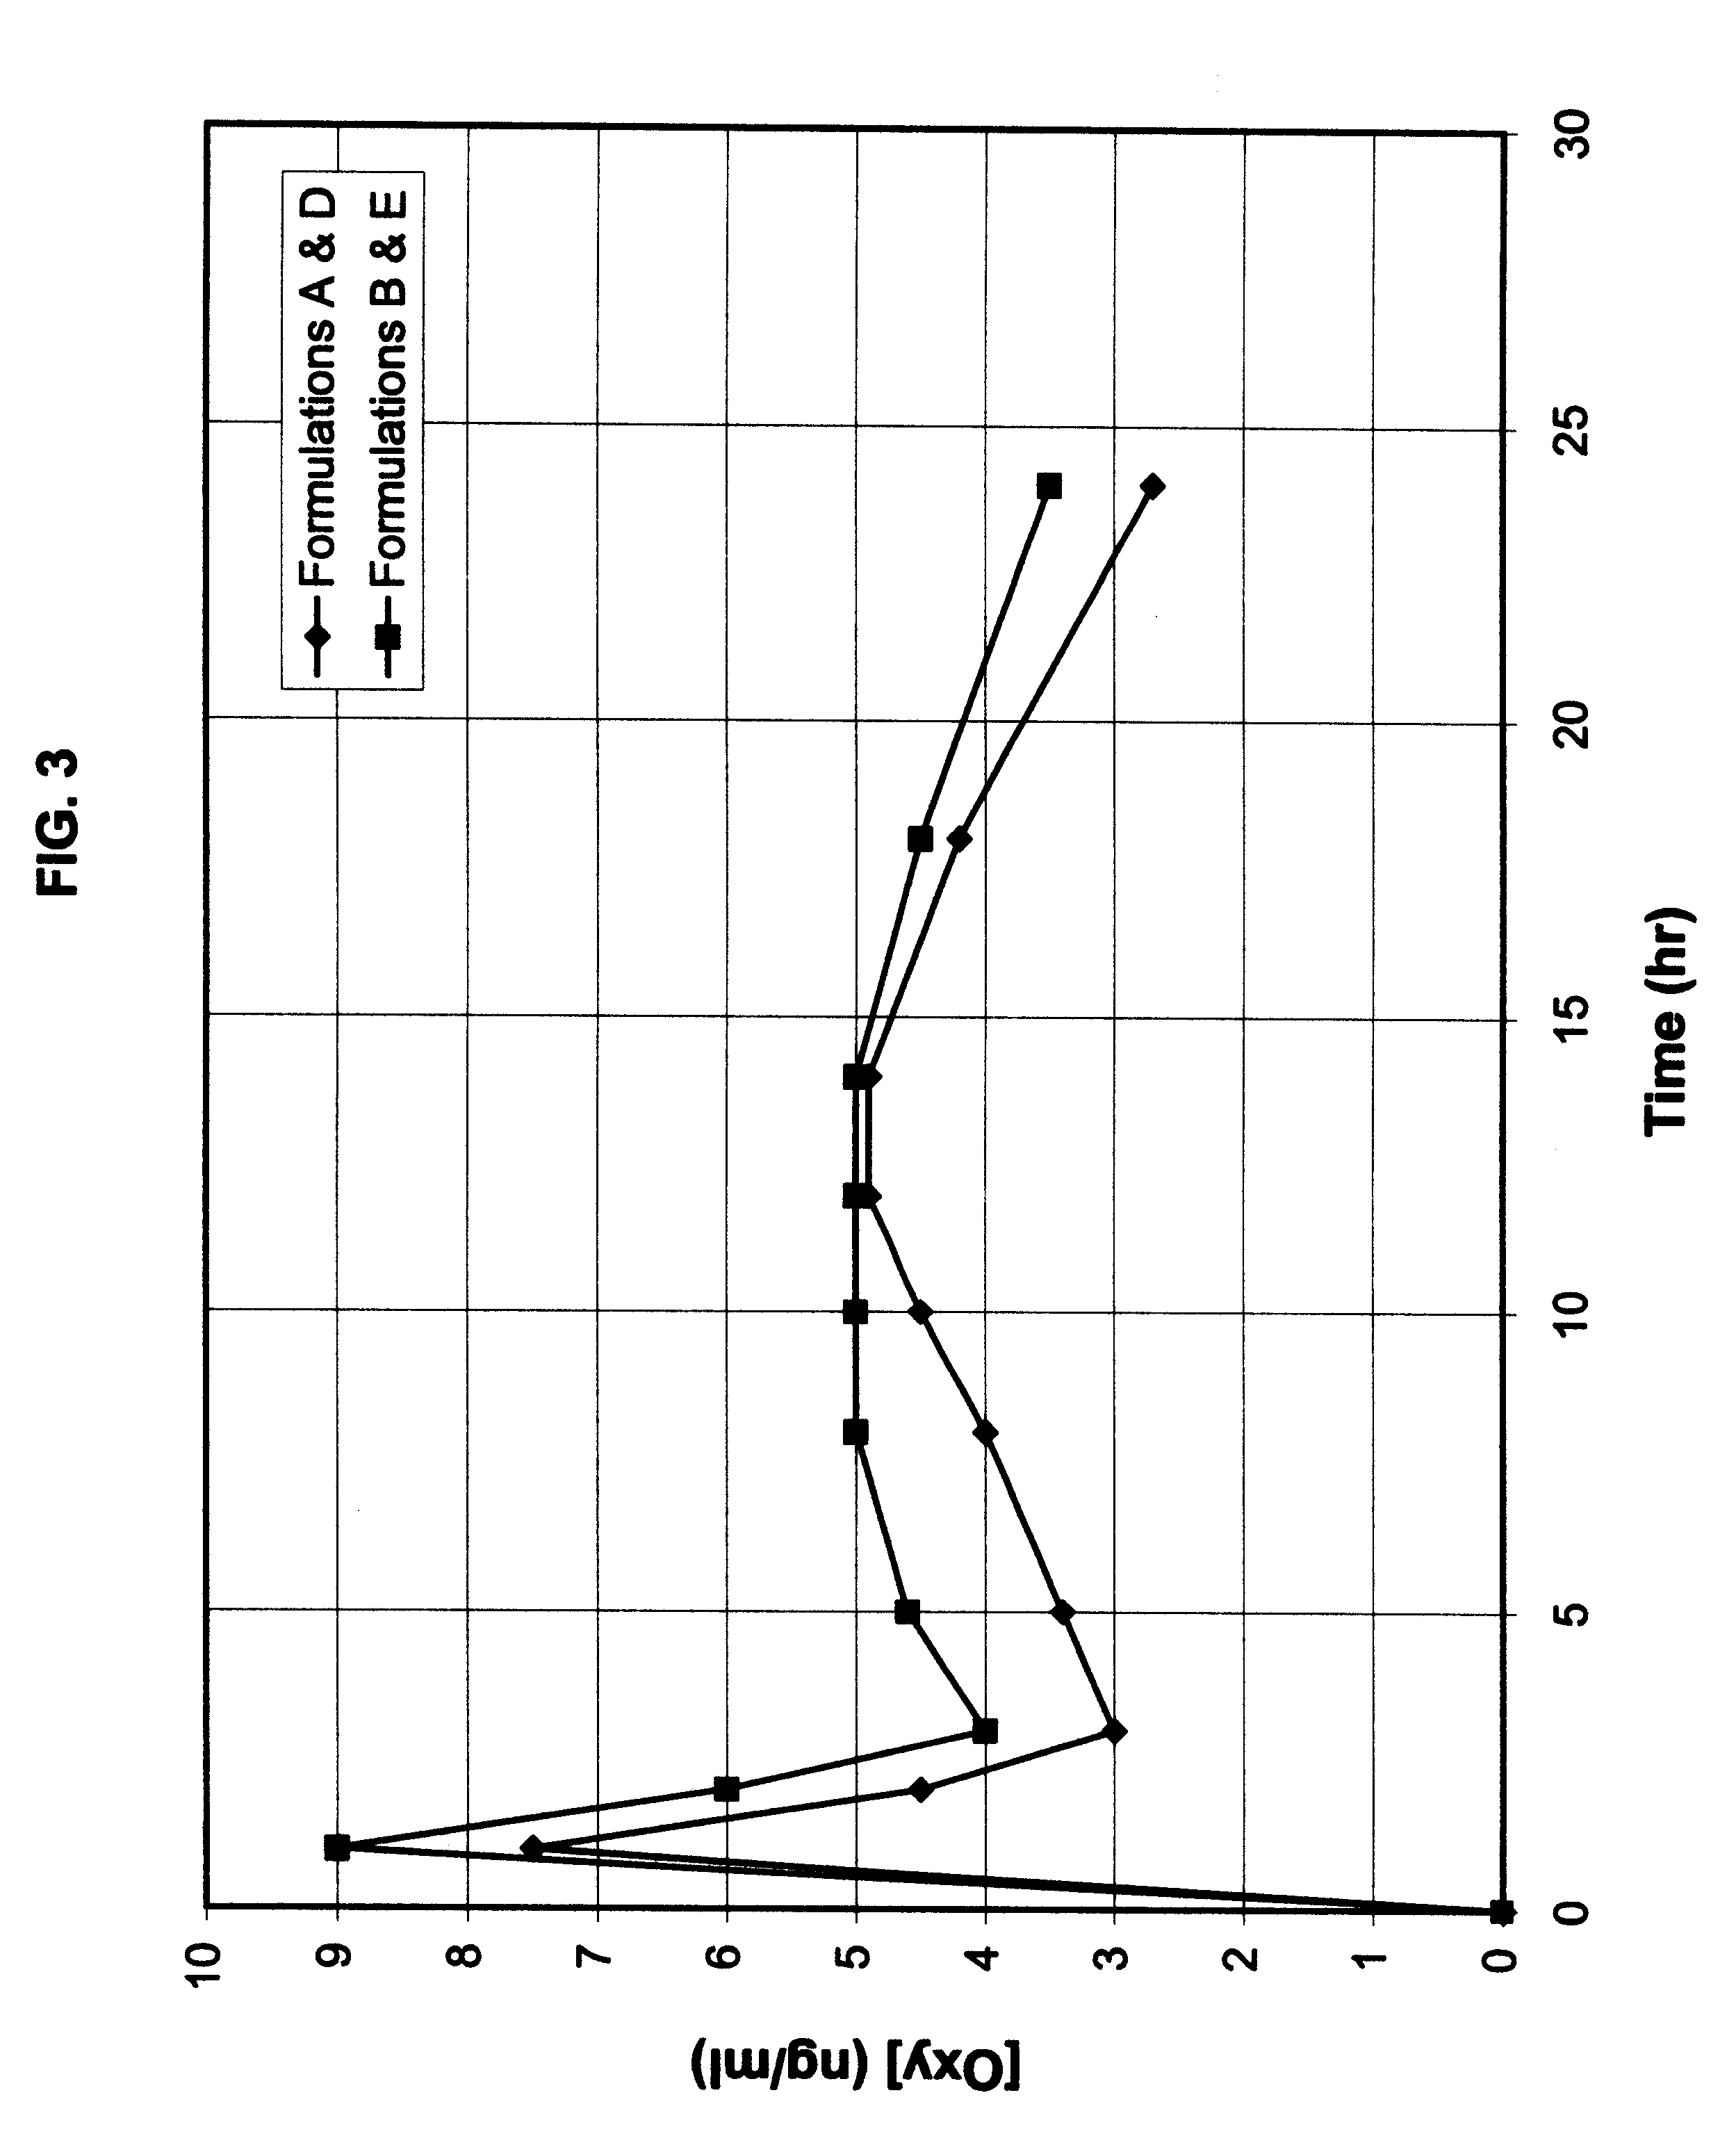 Multi-tablet oxybutynin system for treating incontinence